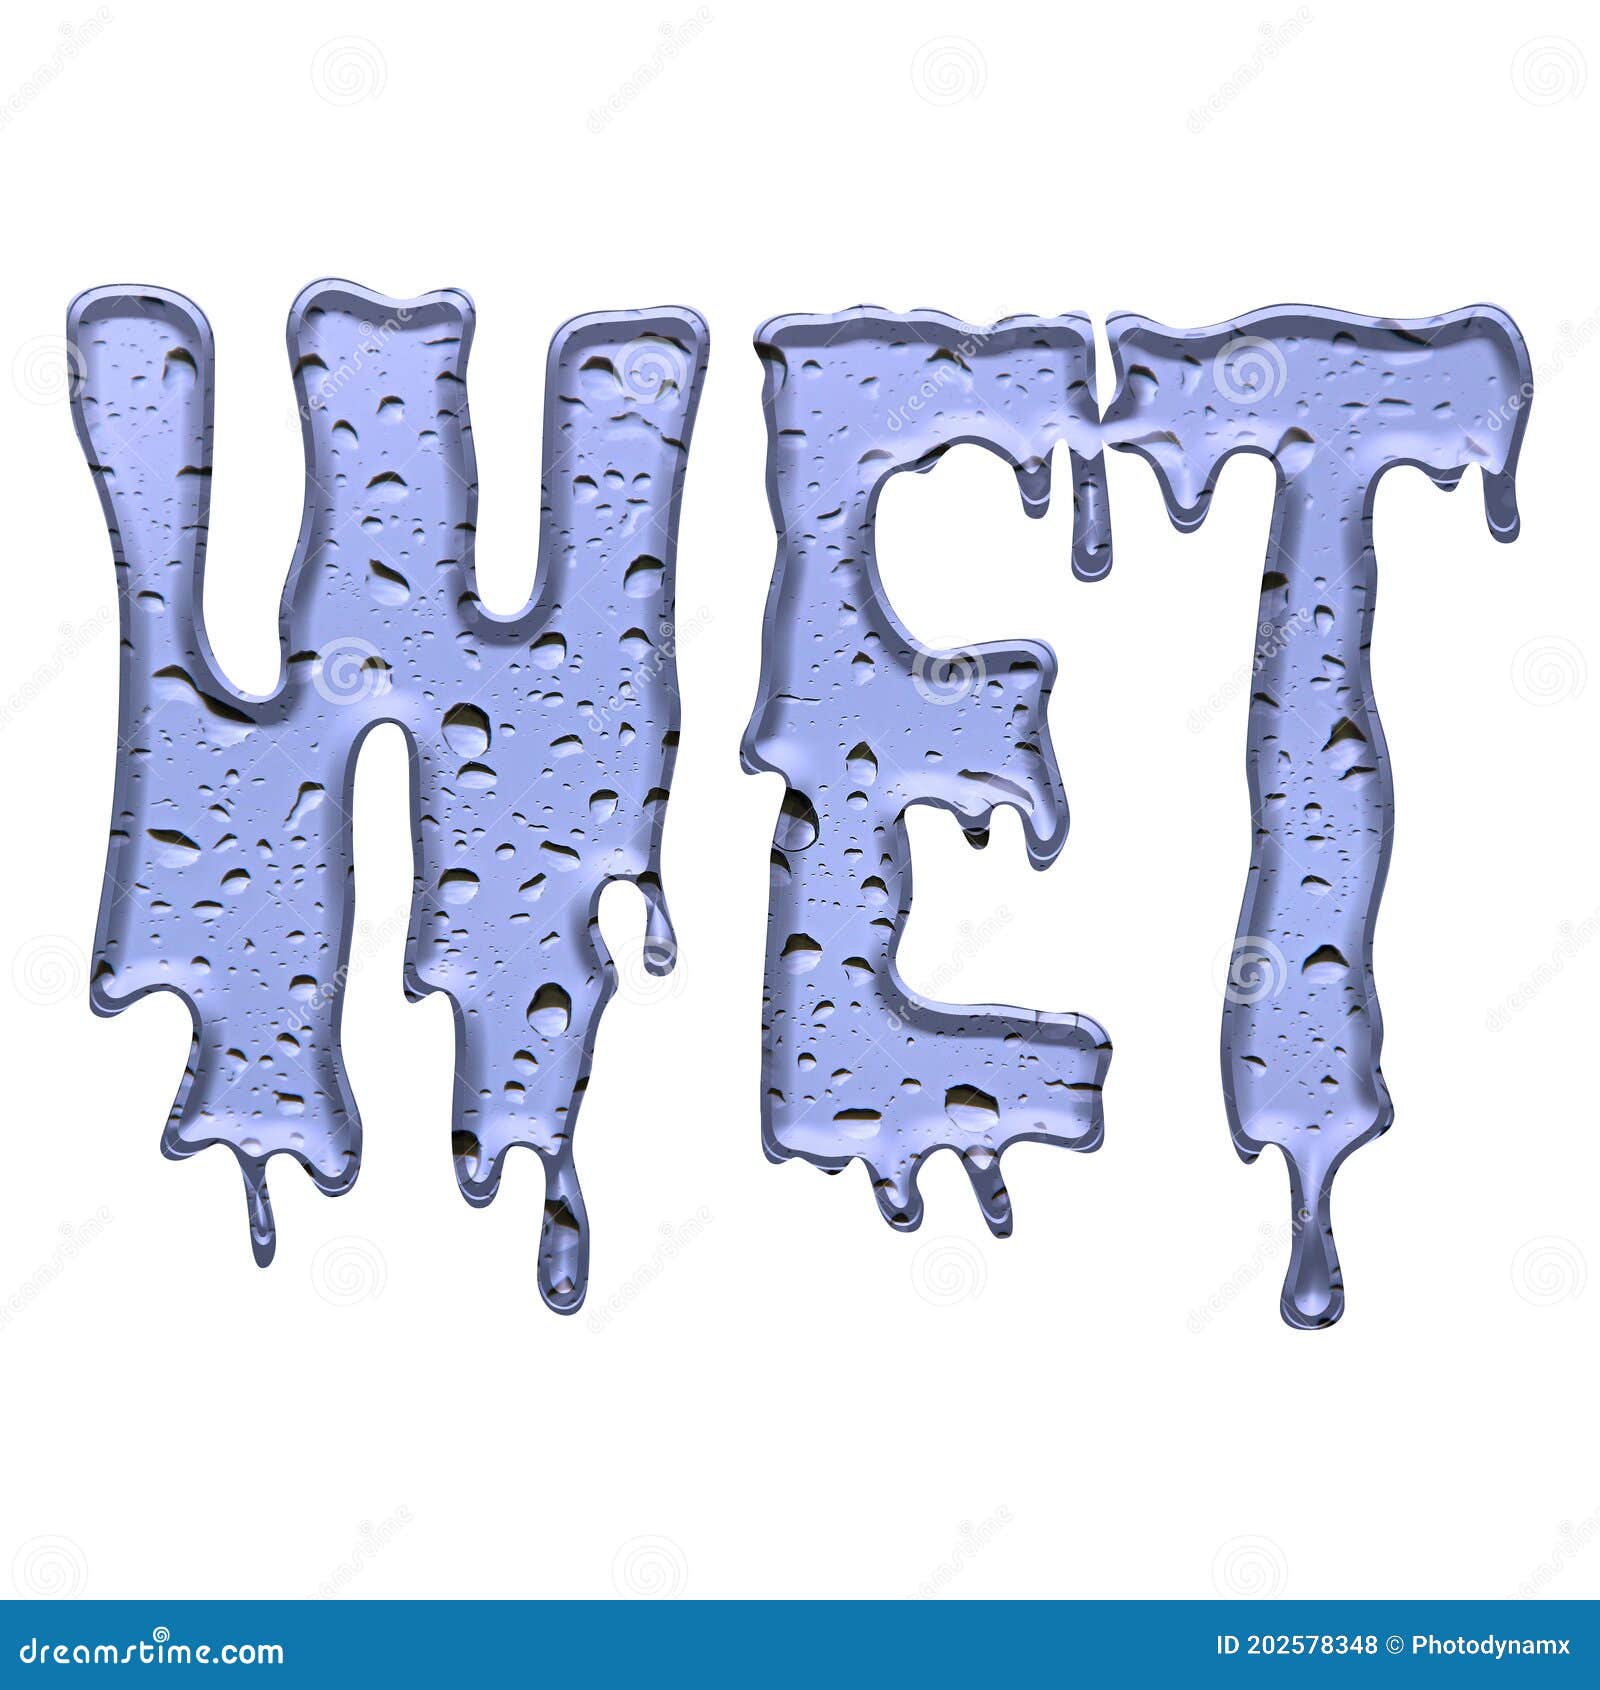 Dripping Wet Water Liquid Ice Hot Melting Melt Wet Font Words Text Typography Heading Type Fonts